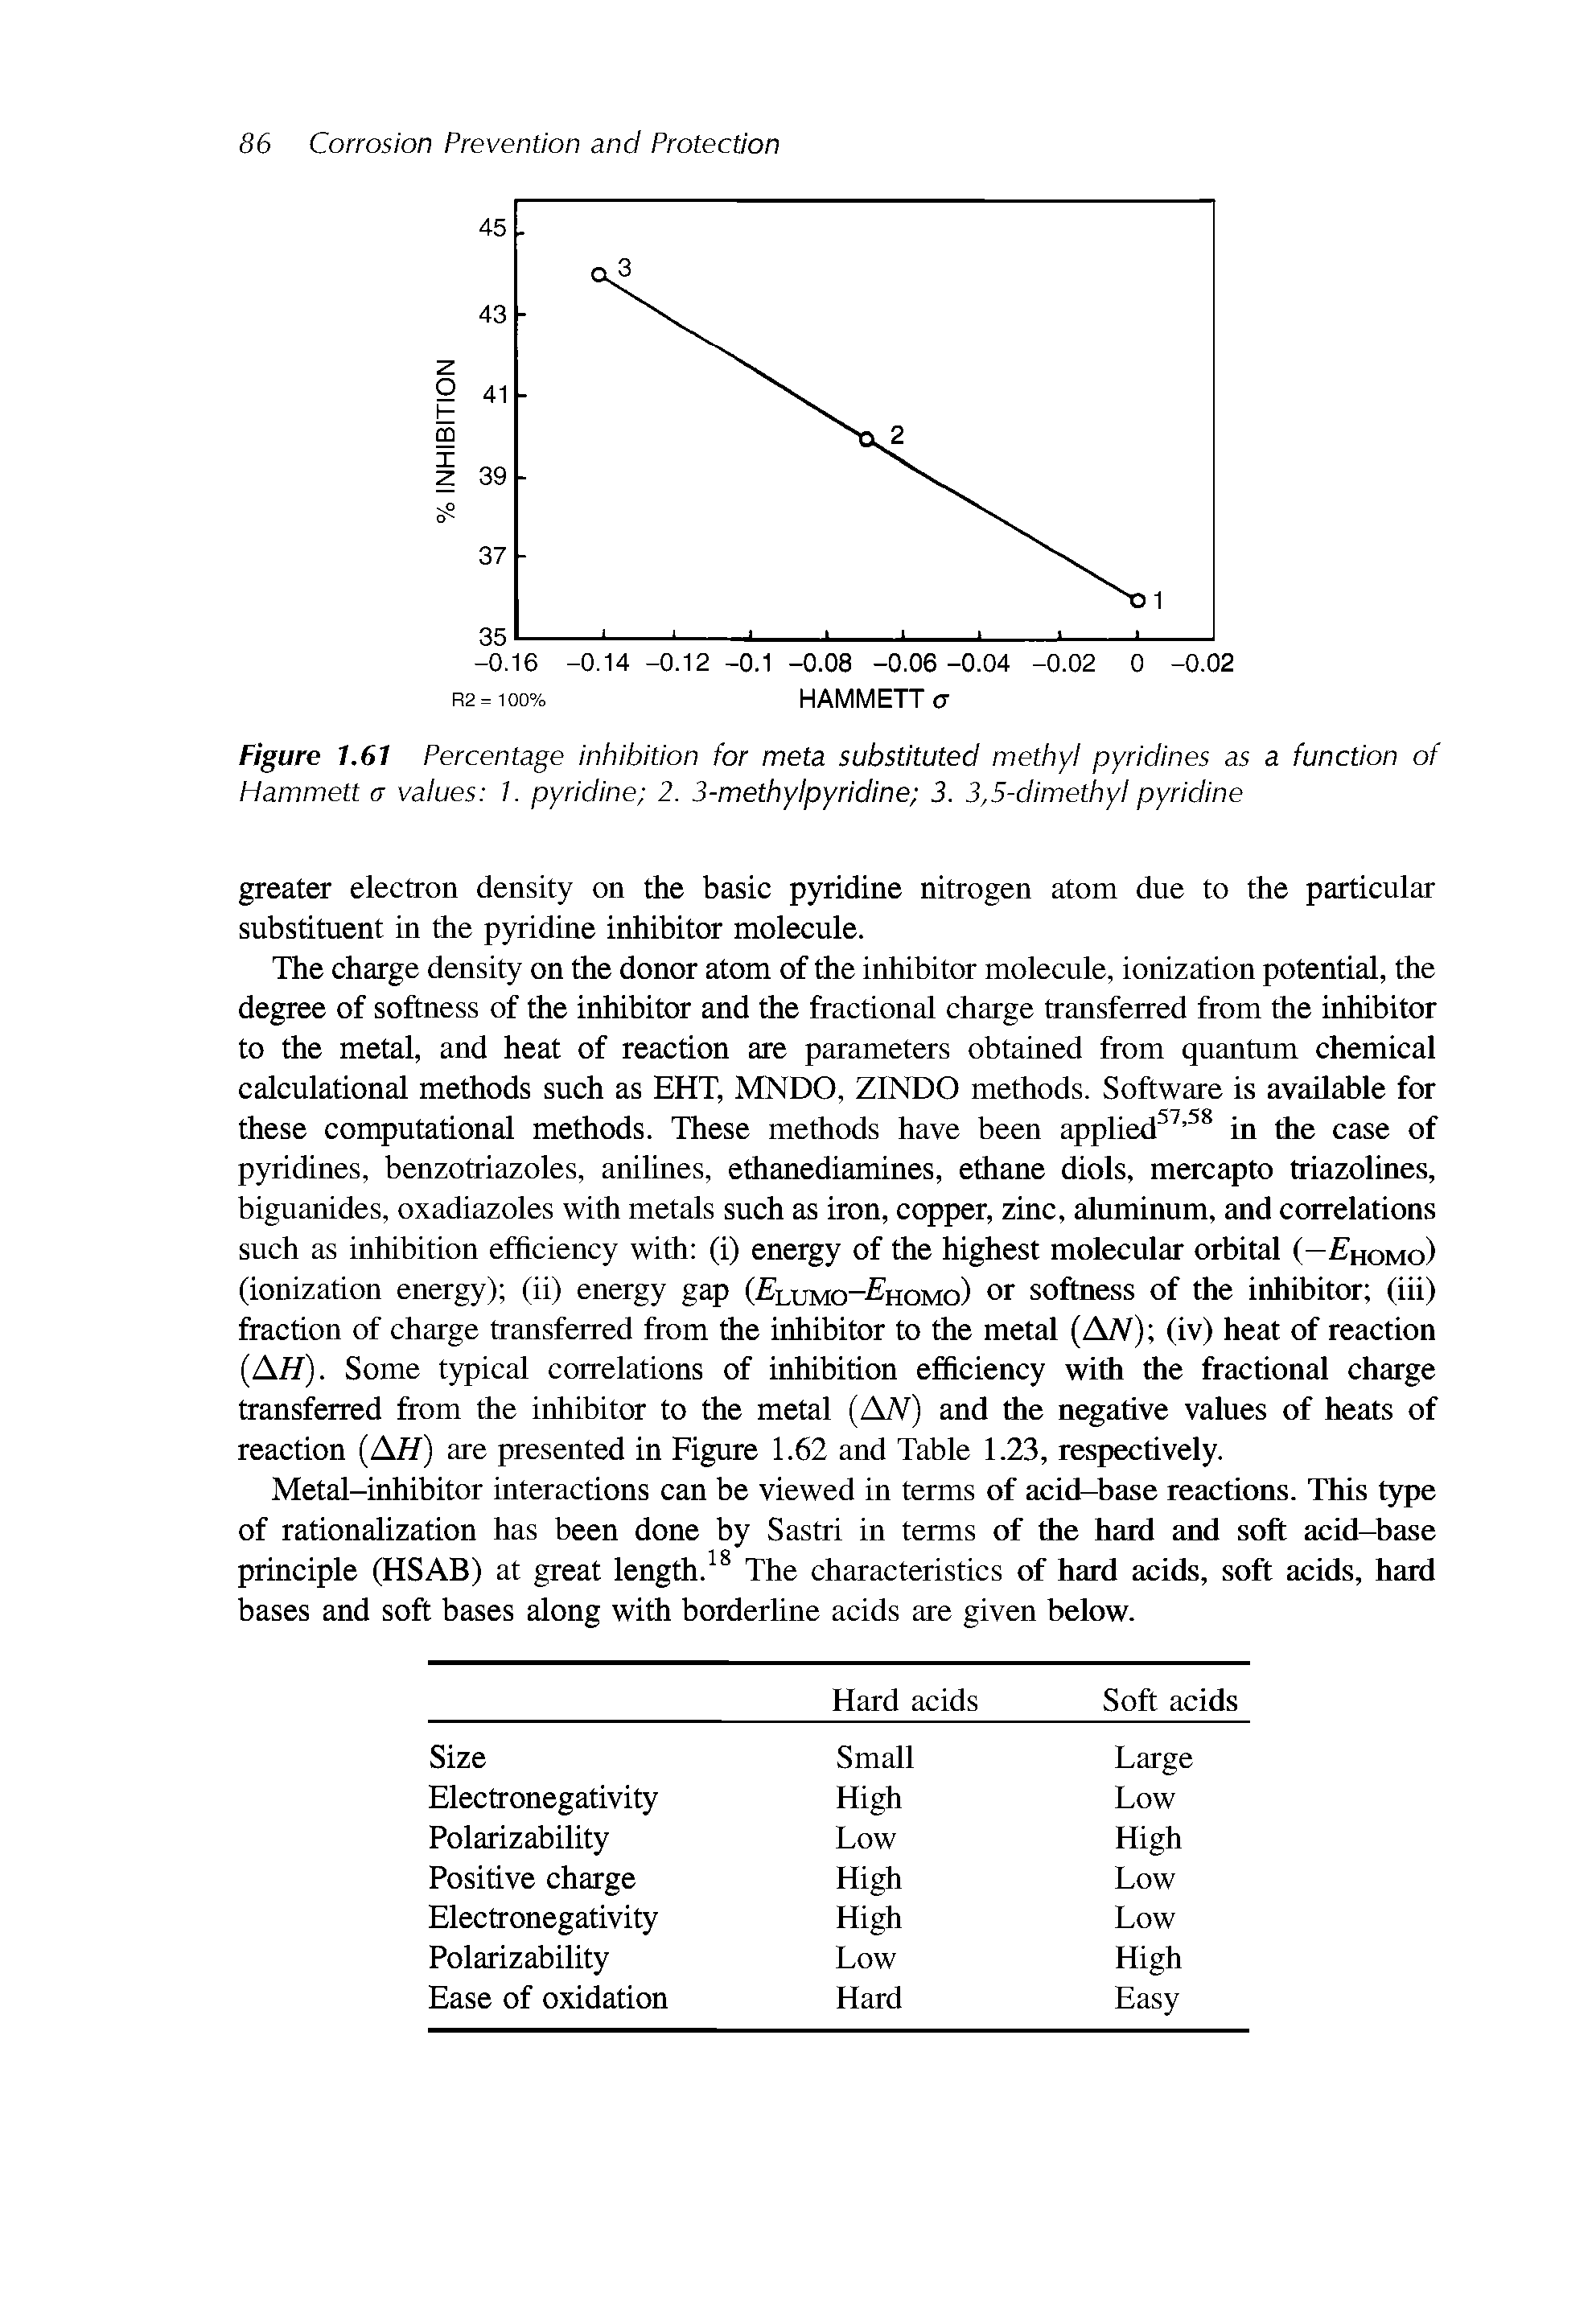 Figure 1.61 Percentage inhibition for meta substituted methyl pyridines as a function of Hammett a values 1. pyridine 2. 3-methylpyridine 3. 3,5-dimethyl pyridine...